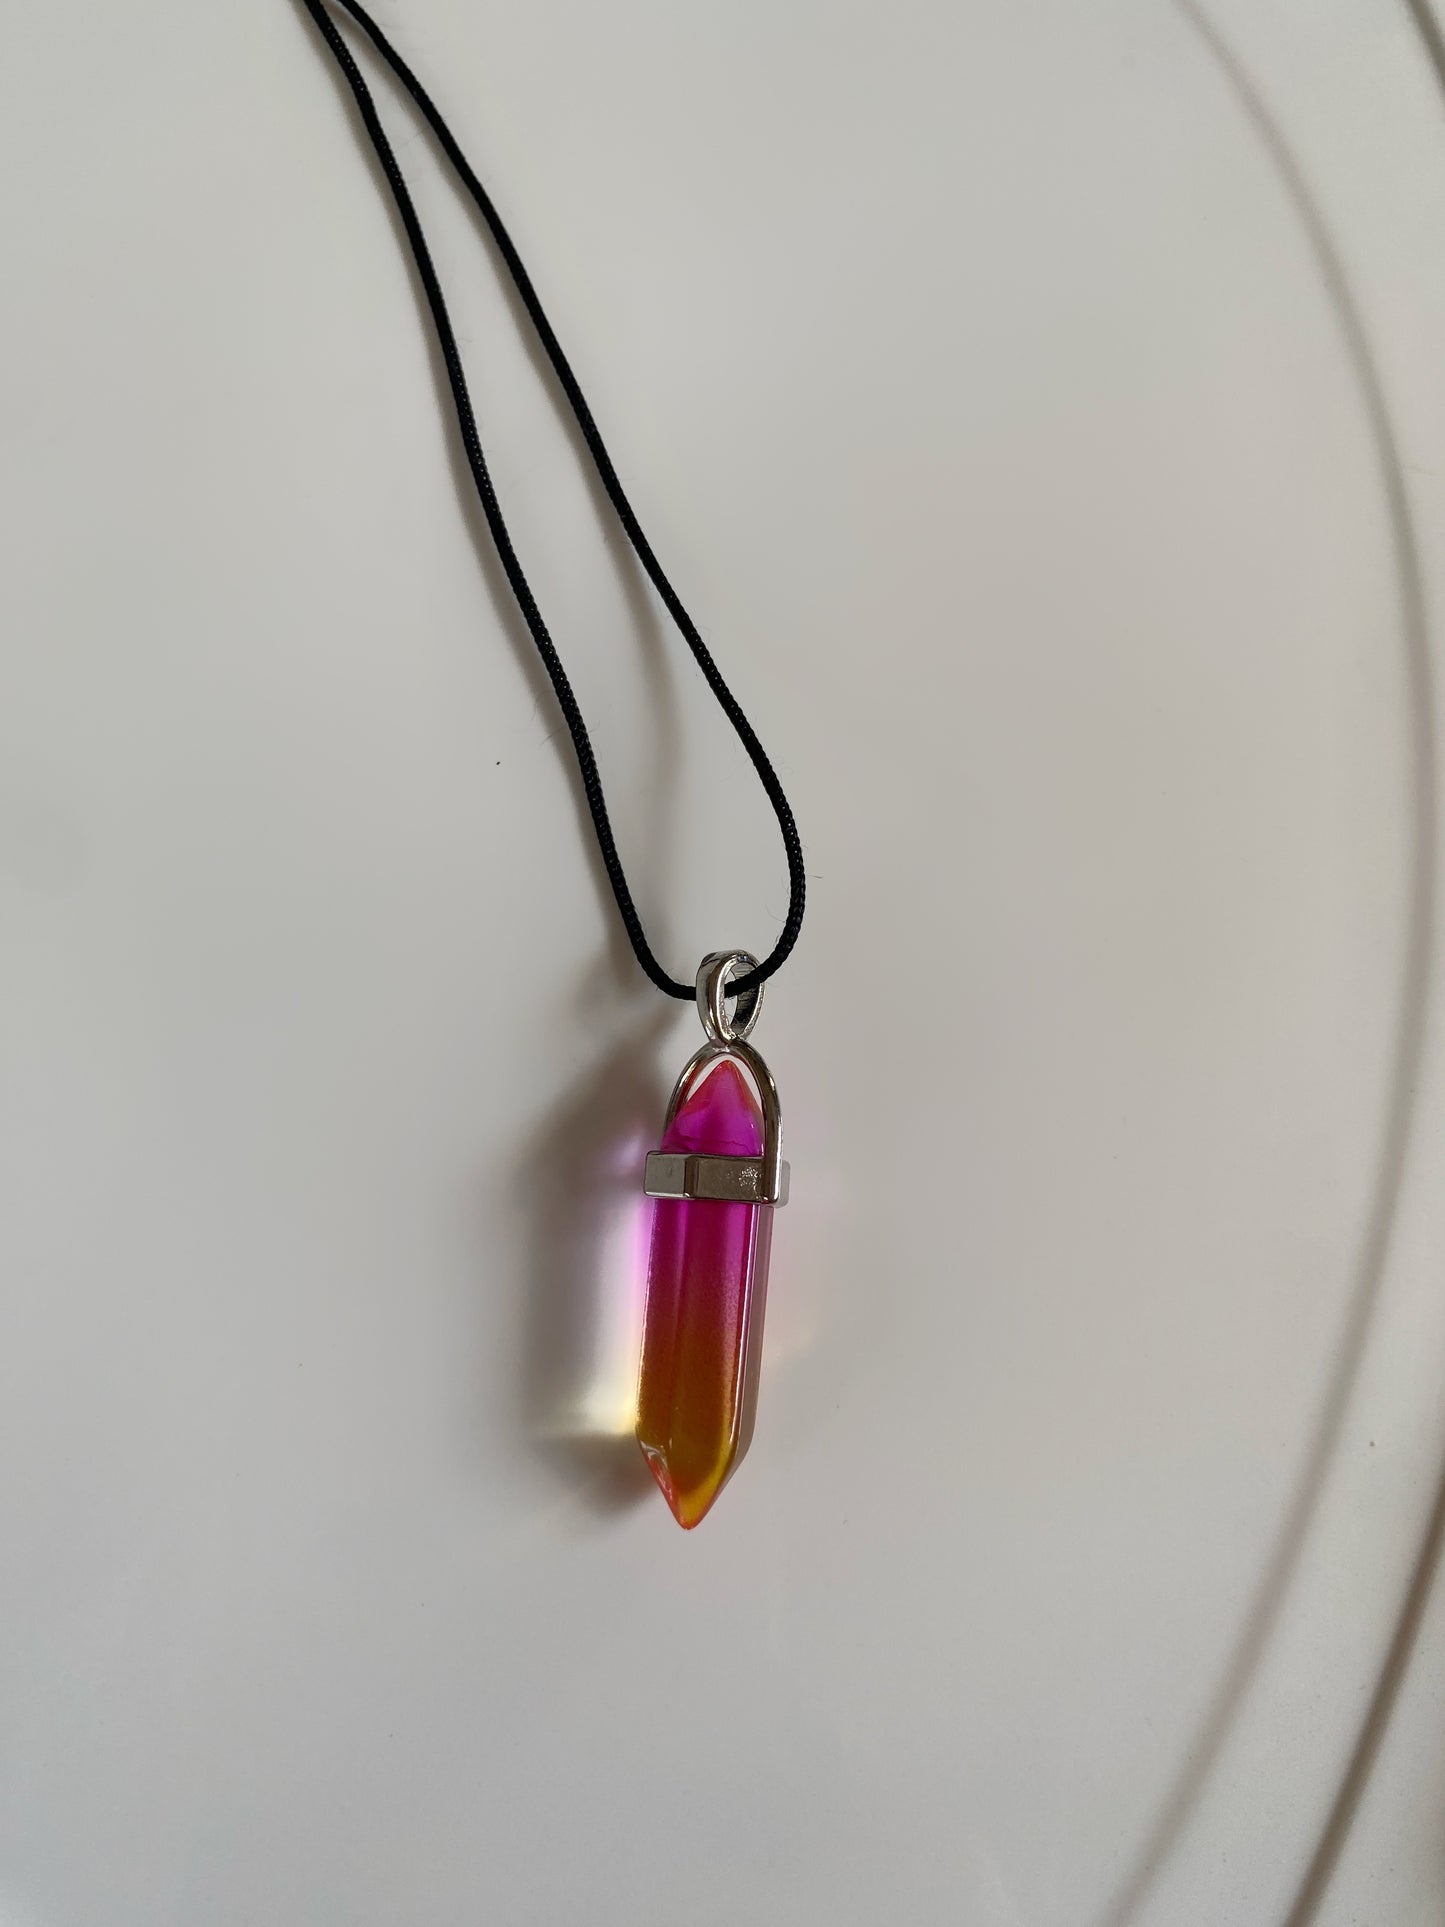 UNISEX PENCIL CRYSTAL PENDENT WITH THREAD